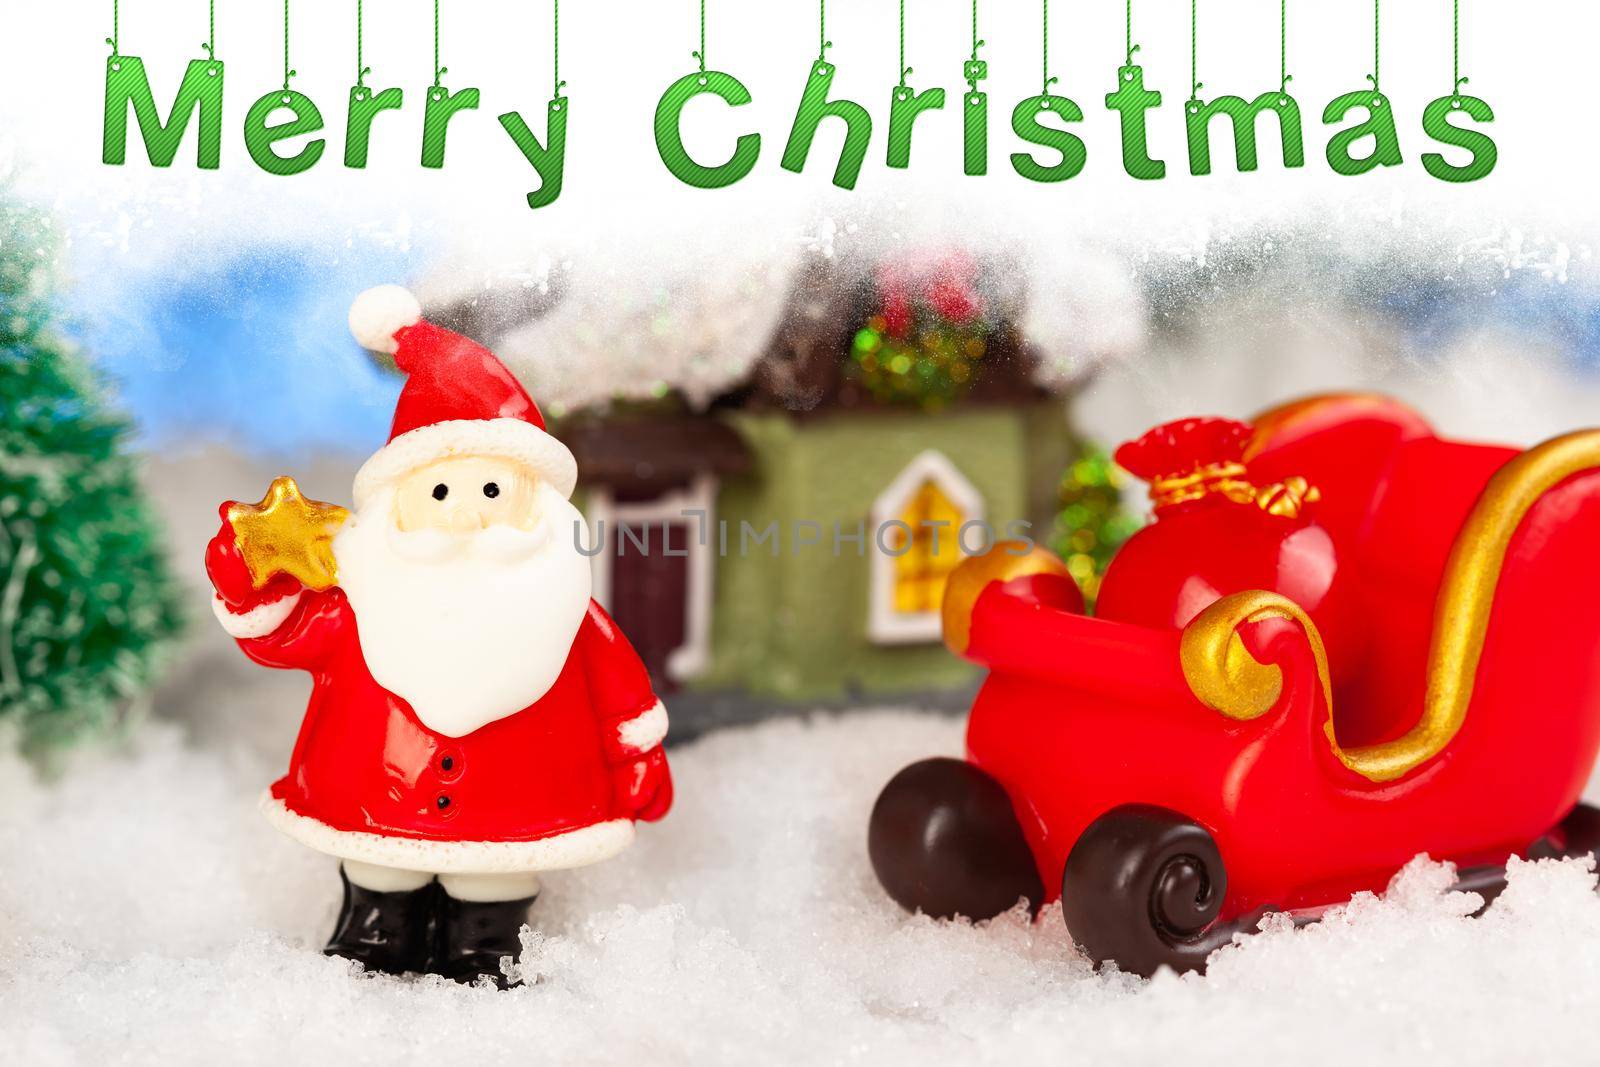 Toy santa claus and sleigh in the snow, artificial fir trees around, christmas greeting card.